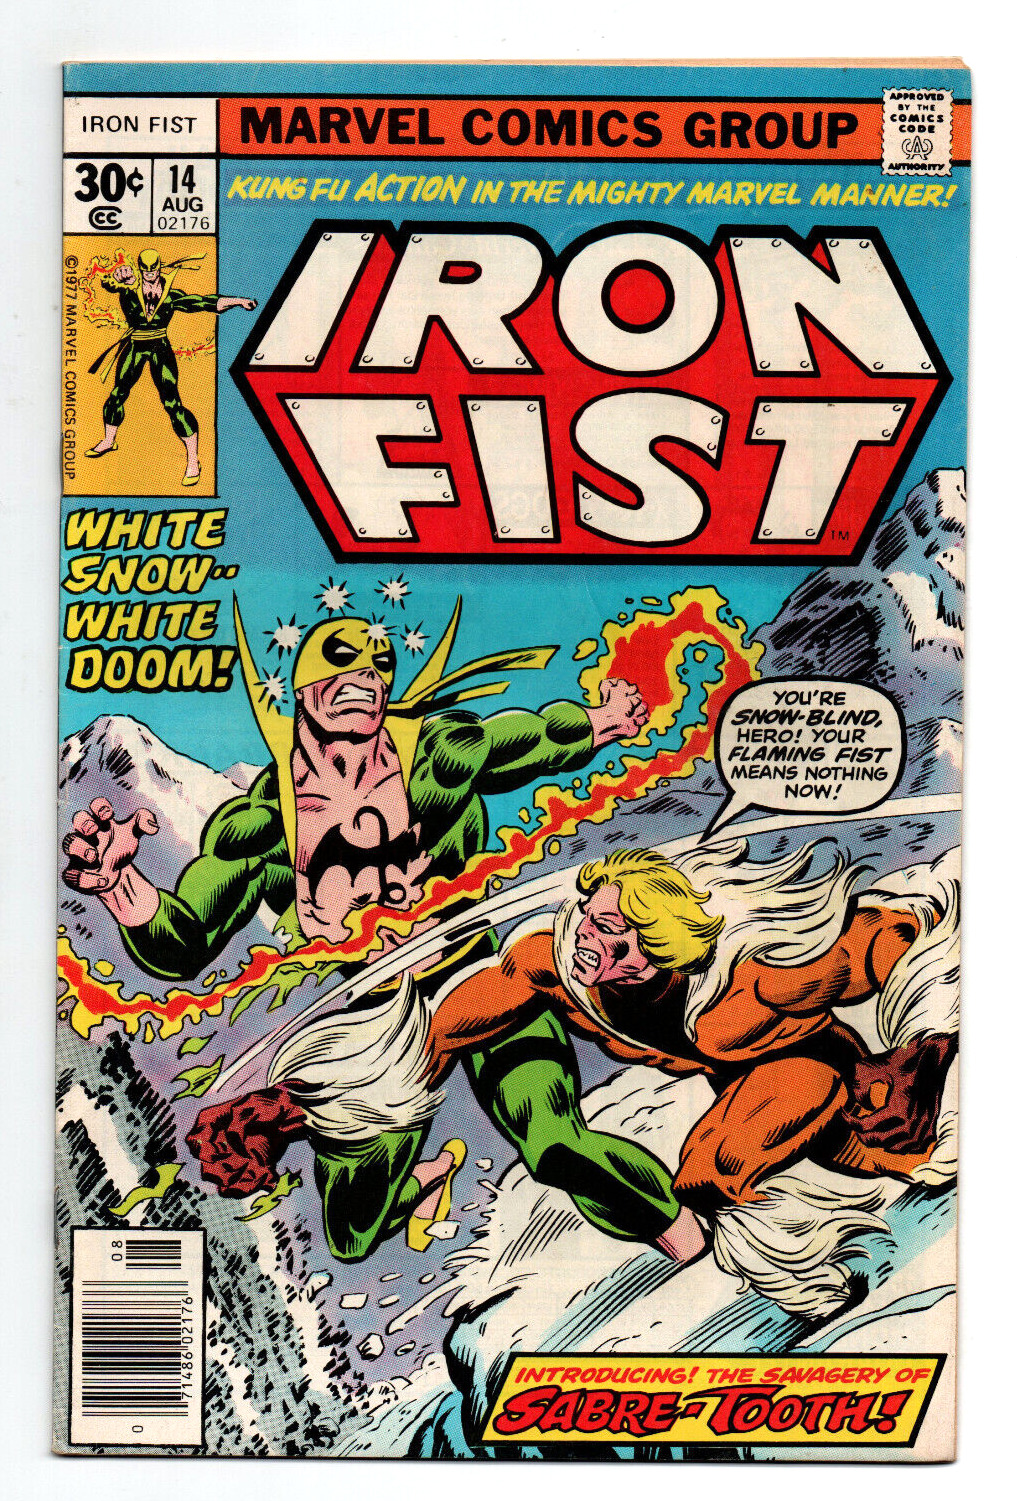 Iron Fist #14 newsstand - 1st appearance of Sabretooth - KEY - 1977 - VF+